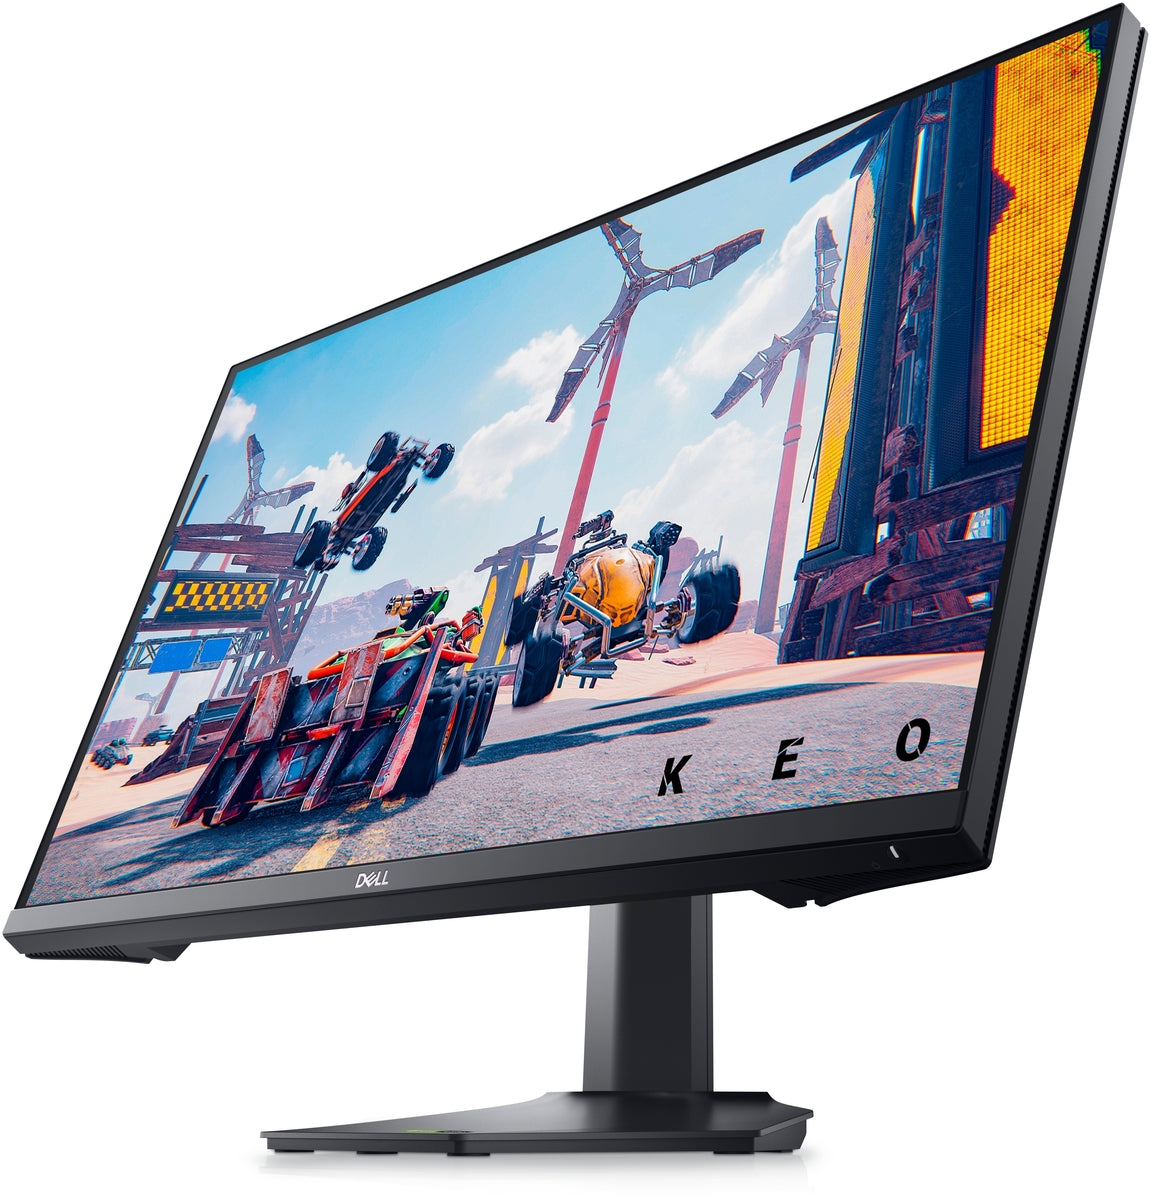 DELL 27 GAMING MONITOR - G2722HS | FHD, 2XHDMI, 1XDP, HEIGHT-ADJUSTABLE, VESA CAPABLE